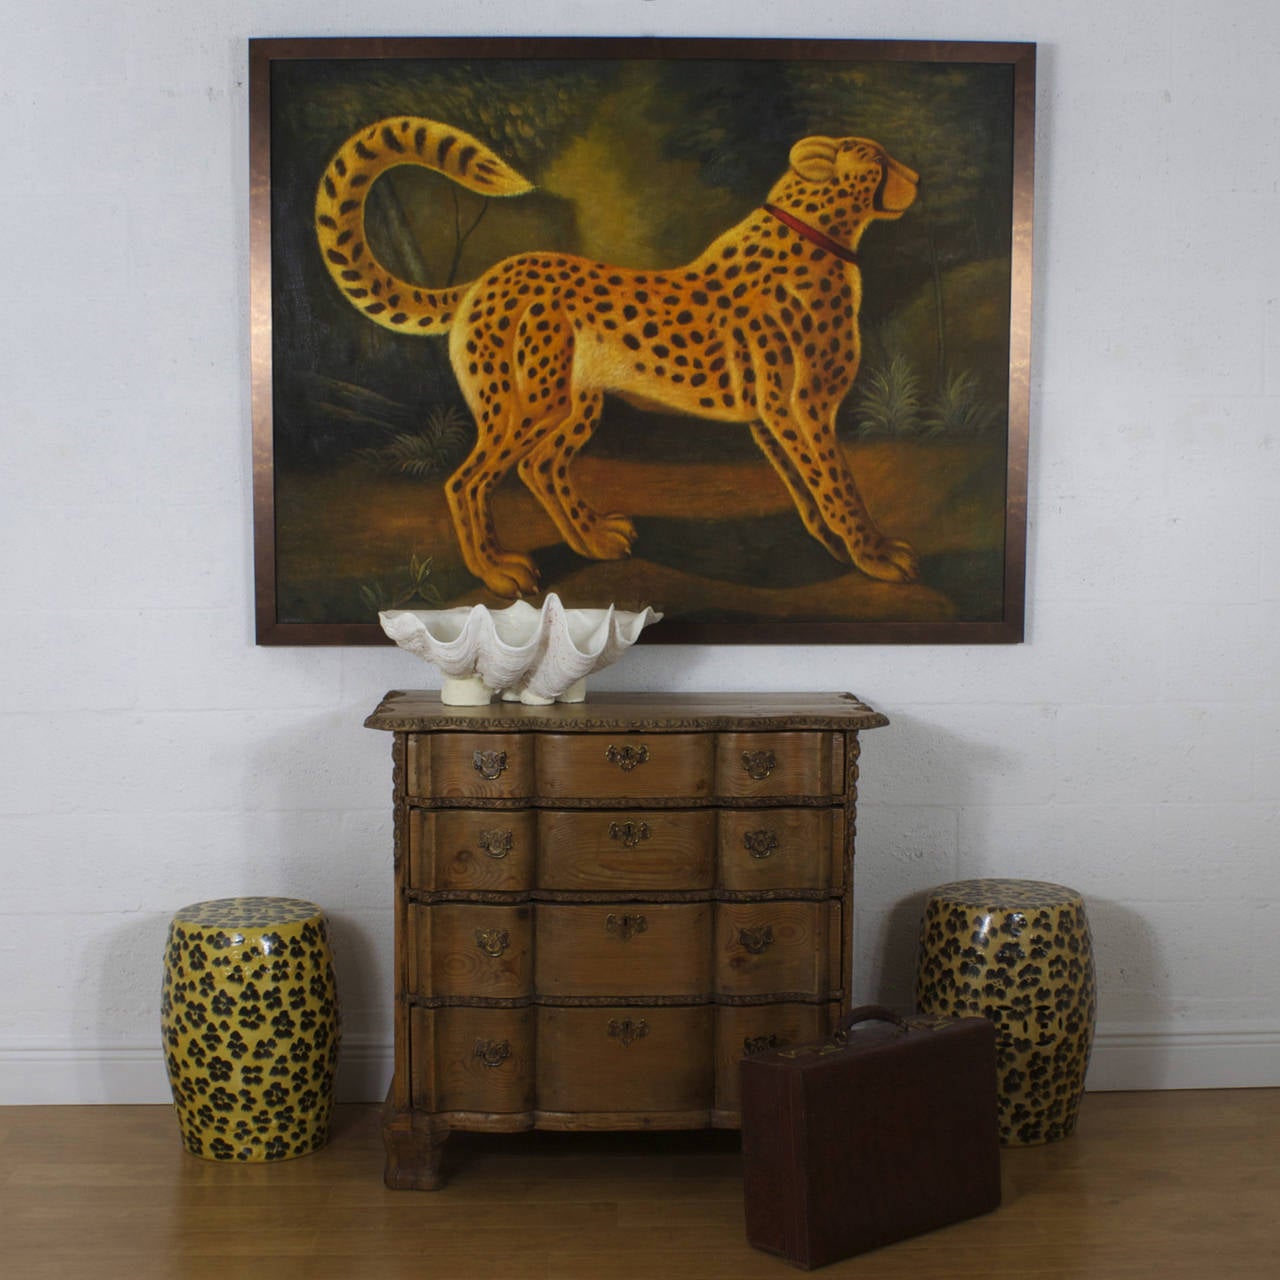 Stylish pair of Mid-Century garden seats with an unexpected leopard print decoration. Made of porcelain and in pure Chinese form, this is a contemporary variation of a classic idea. These exotic beauties are absolutely versatile and could be used as